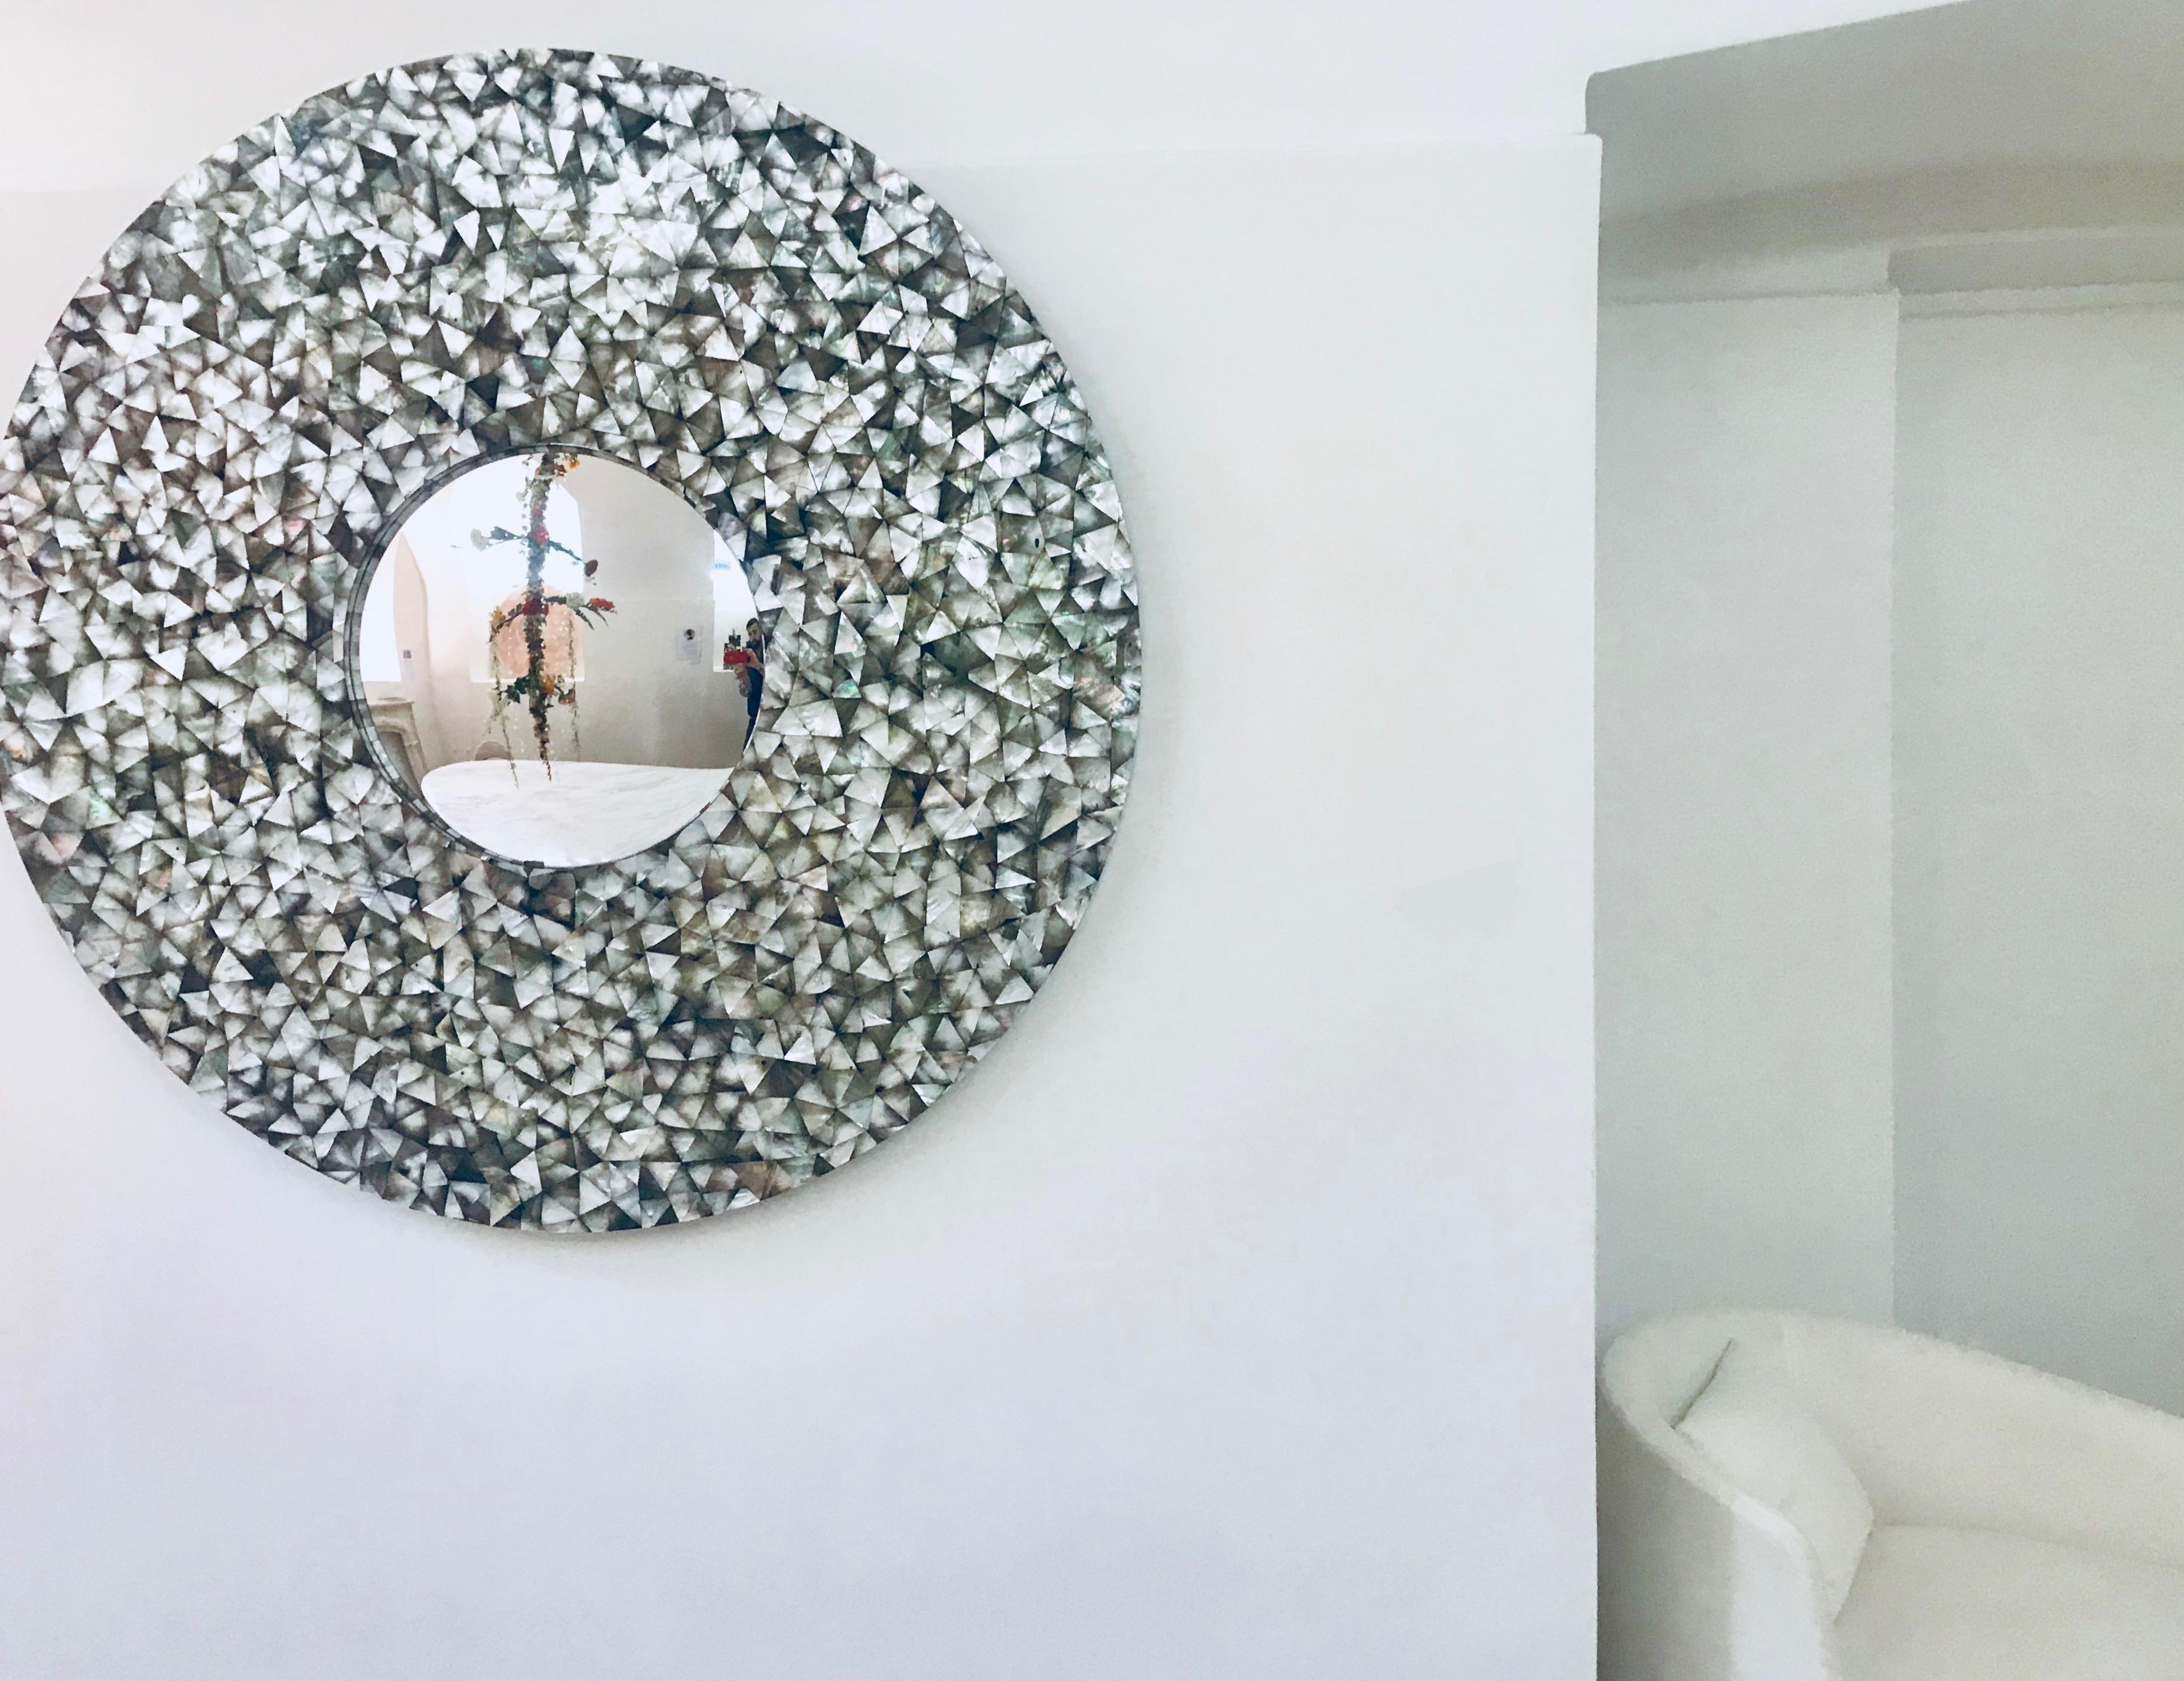 The 'Crystal Sea' is a large handcrafted wall mounted piece with a convex central mirror which amplifies its surroundings.

Its frame is inlaid with hundreds of pieces of irrgegularly cut Mother of Pearl. Mother of Pearl an authentic jewel of the